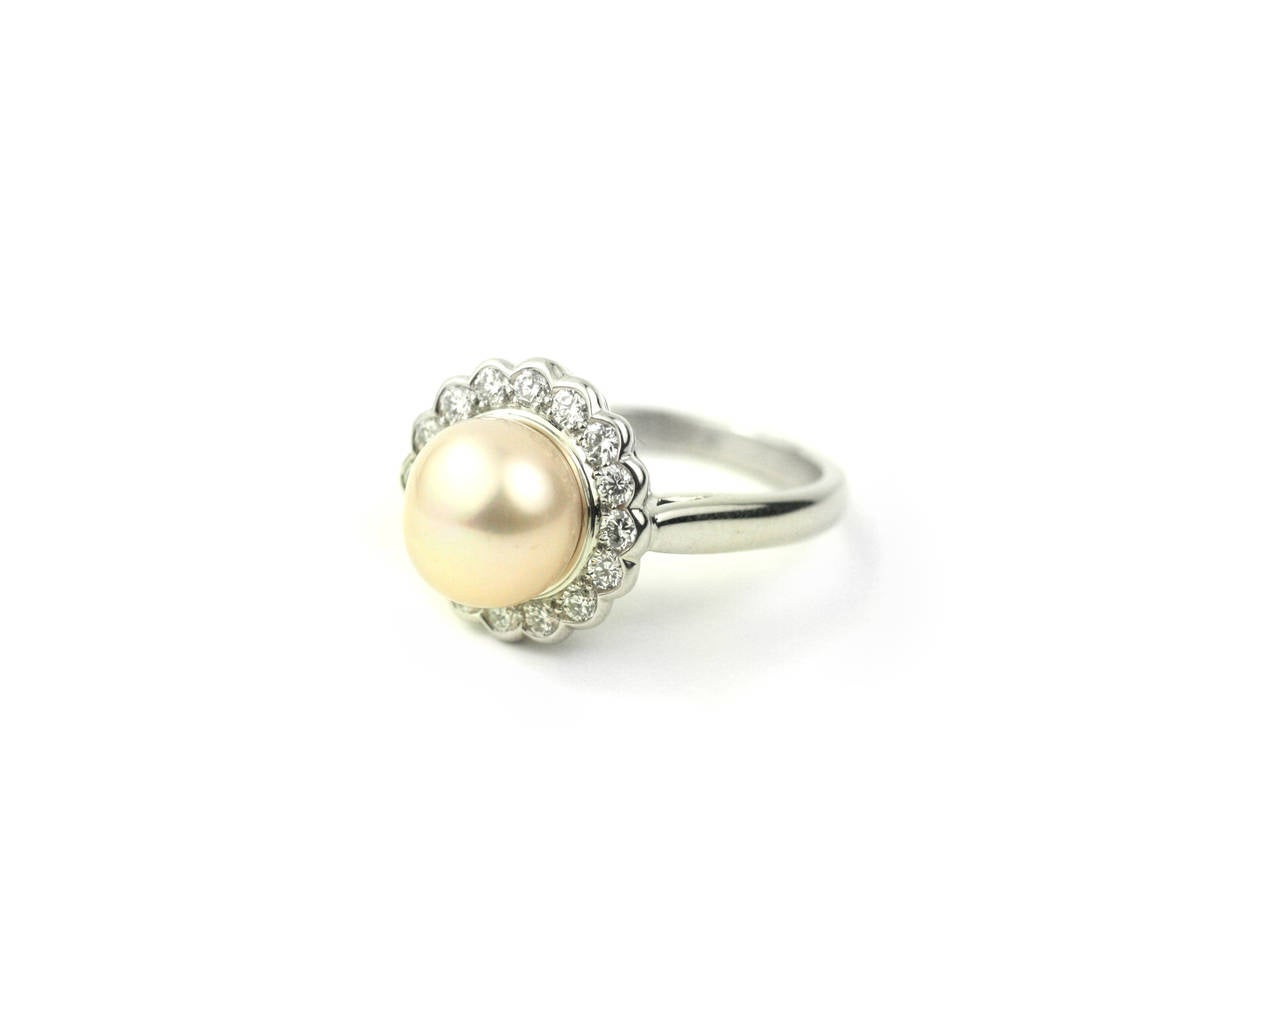 This beautiful and elegant ring is made with platinum and contains 1 light pink freshwater pearl and 16 brilliant diamonds equalling .32 cts. Designed and made in-house by Julius Cohen New York.